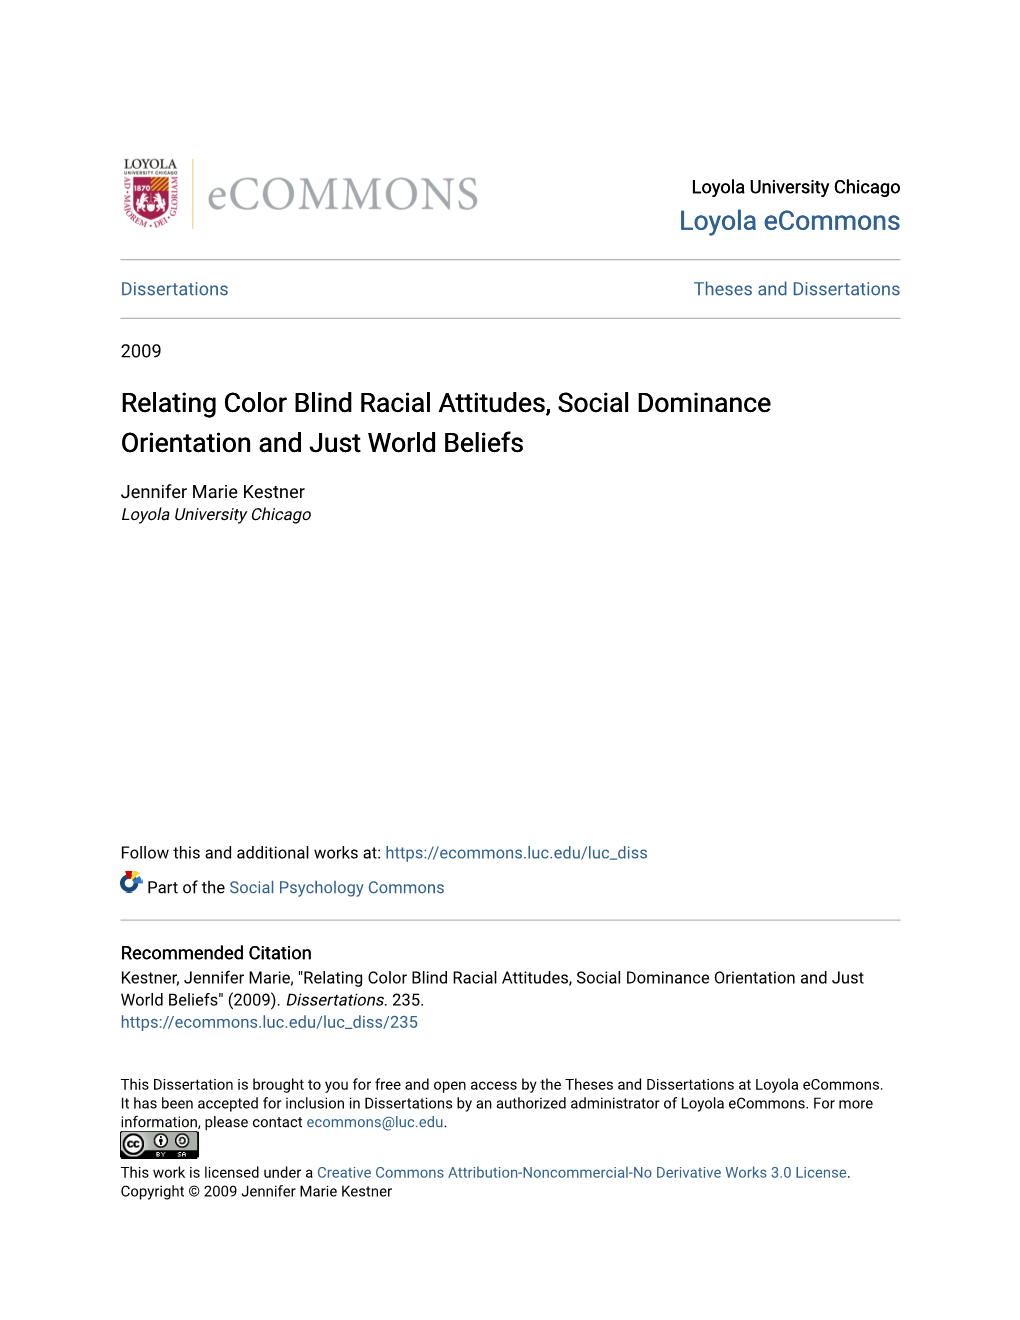 Relating Color Blind Racial Attitudes, Social Dominance Orientation and Just World Beliefs